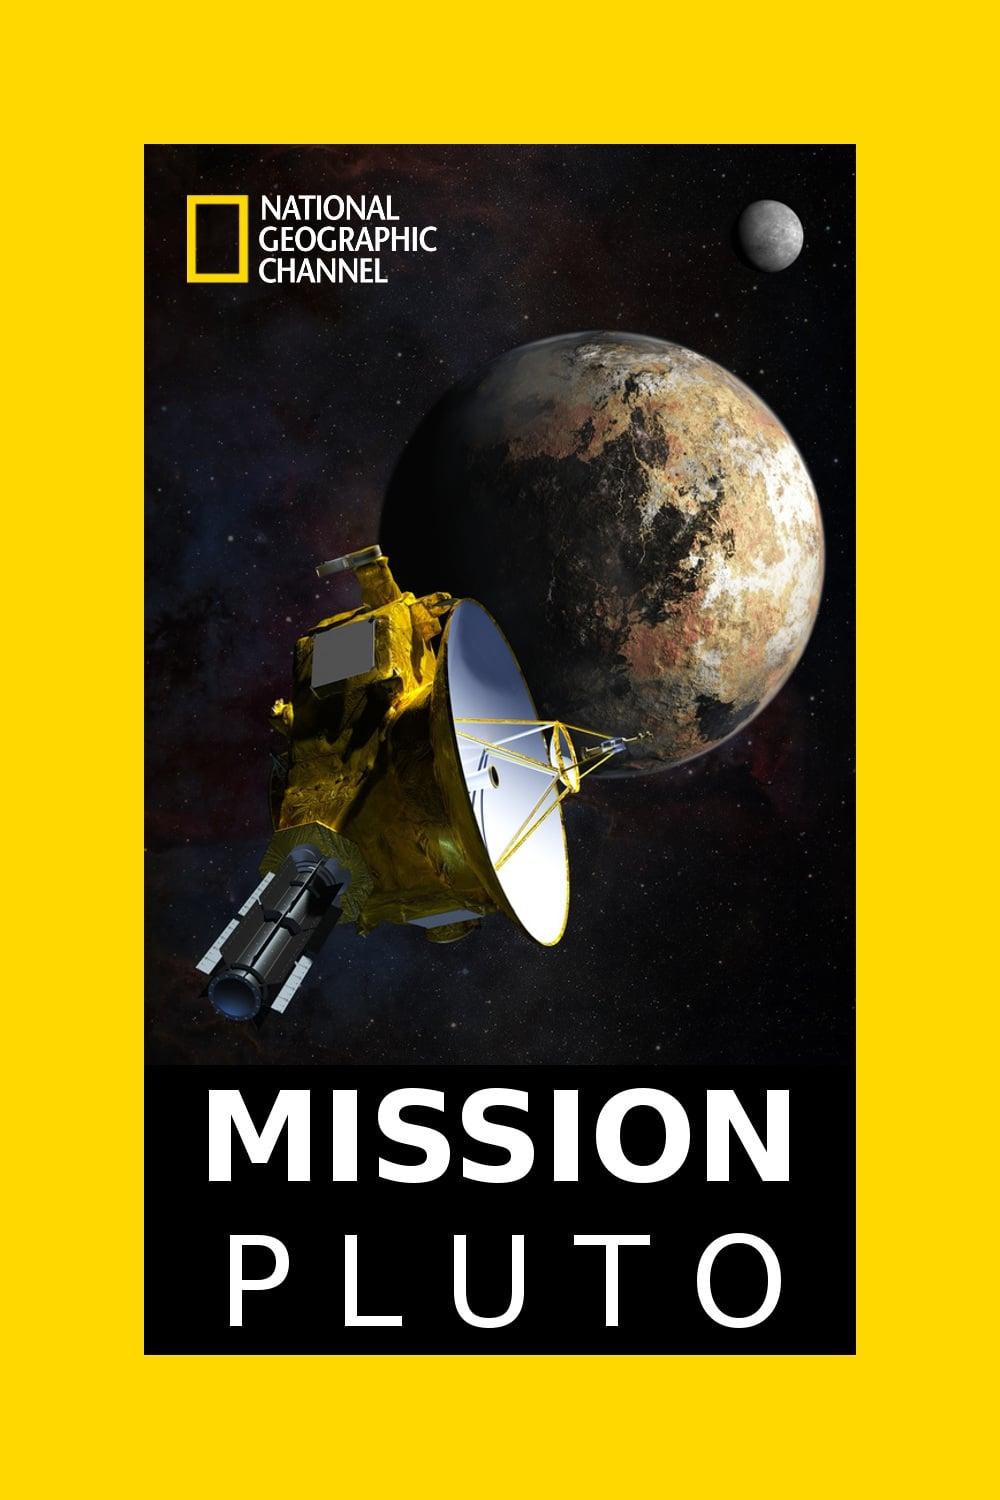 Mission Pluto poster